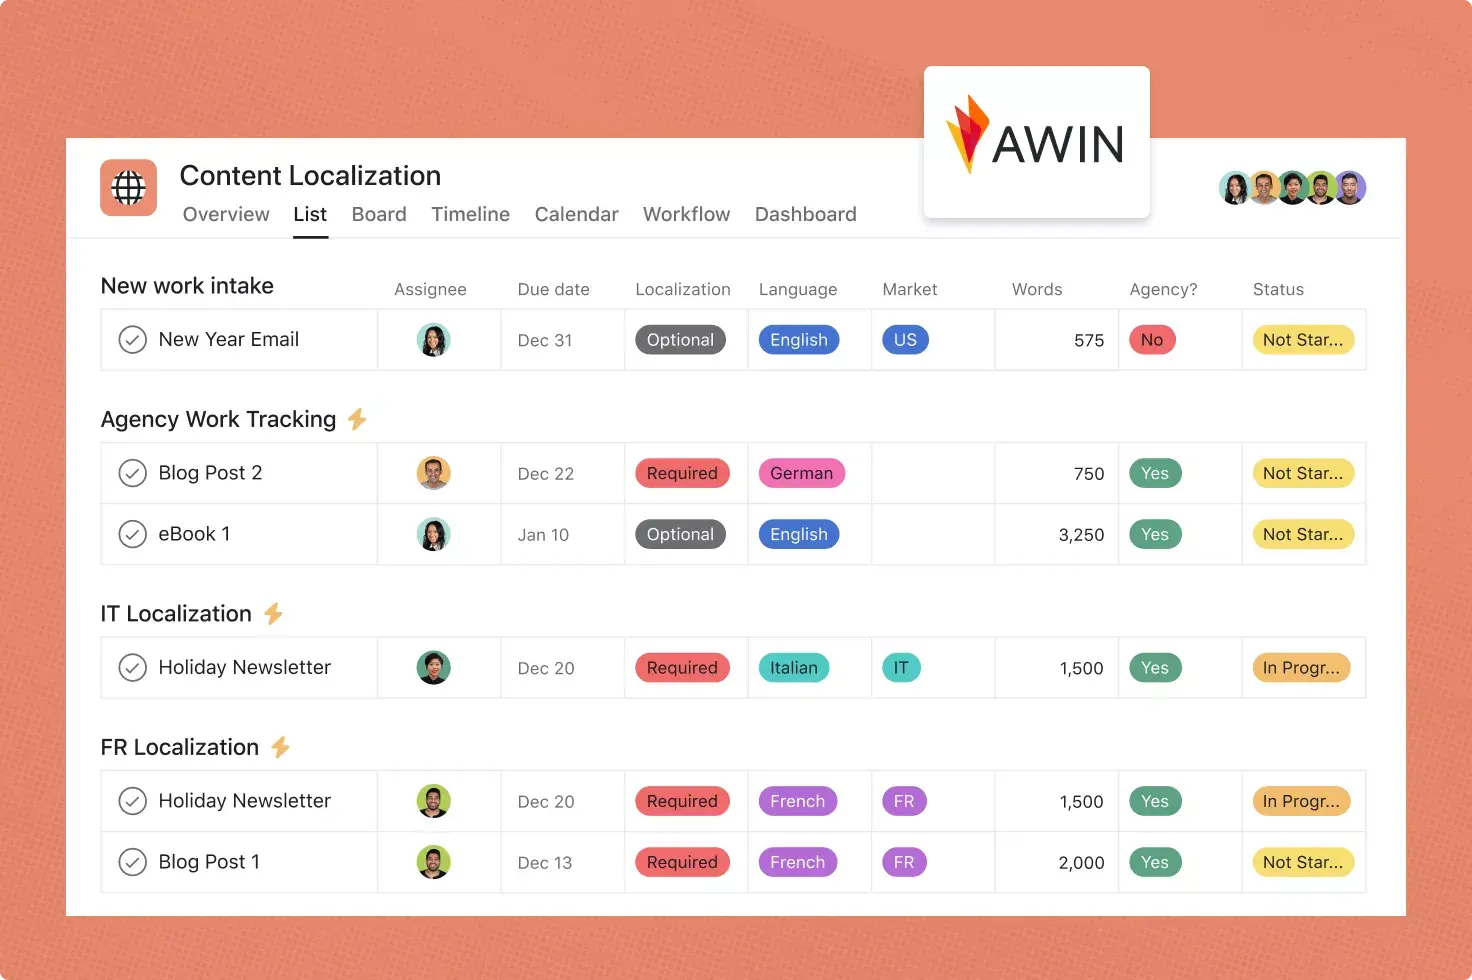 Awin uses Asana for their automated localization workflow